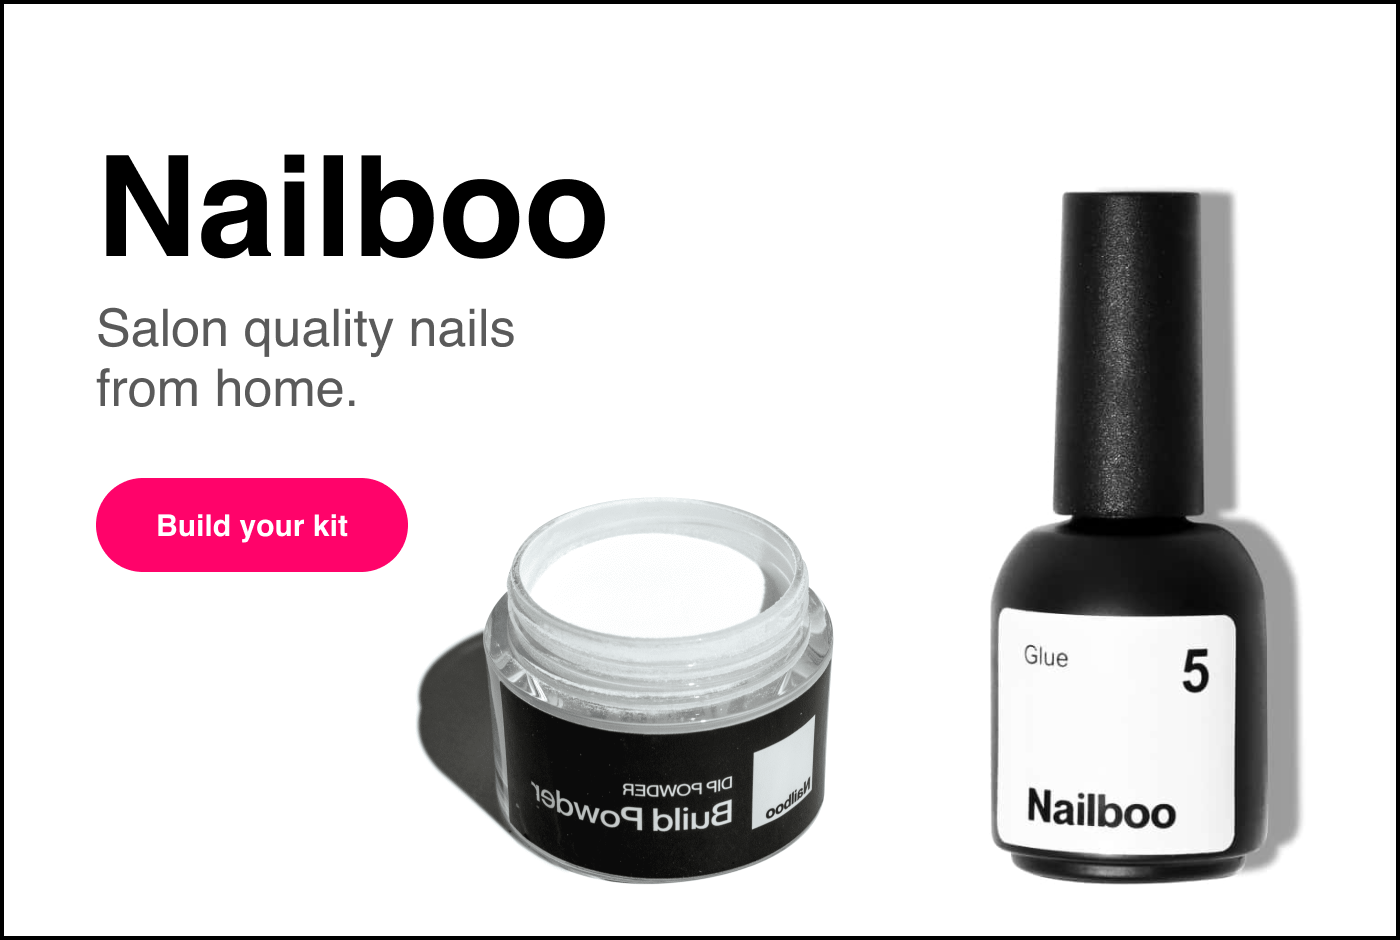 What Is The Best Type Of Nail Polish For Healthy Nails? | Nail Polish Direct